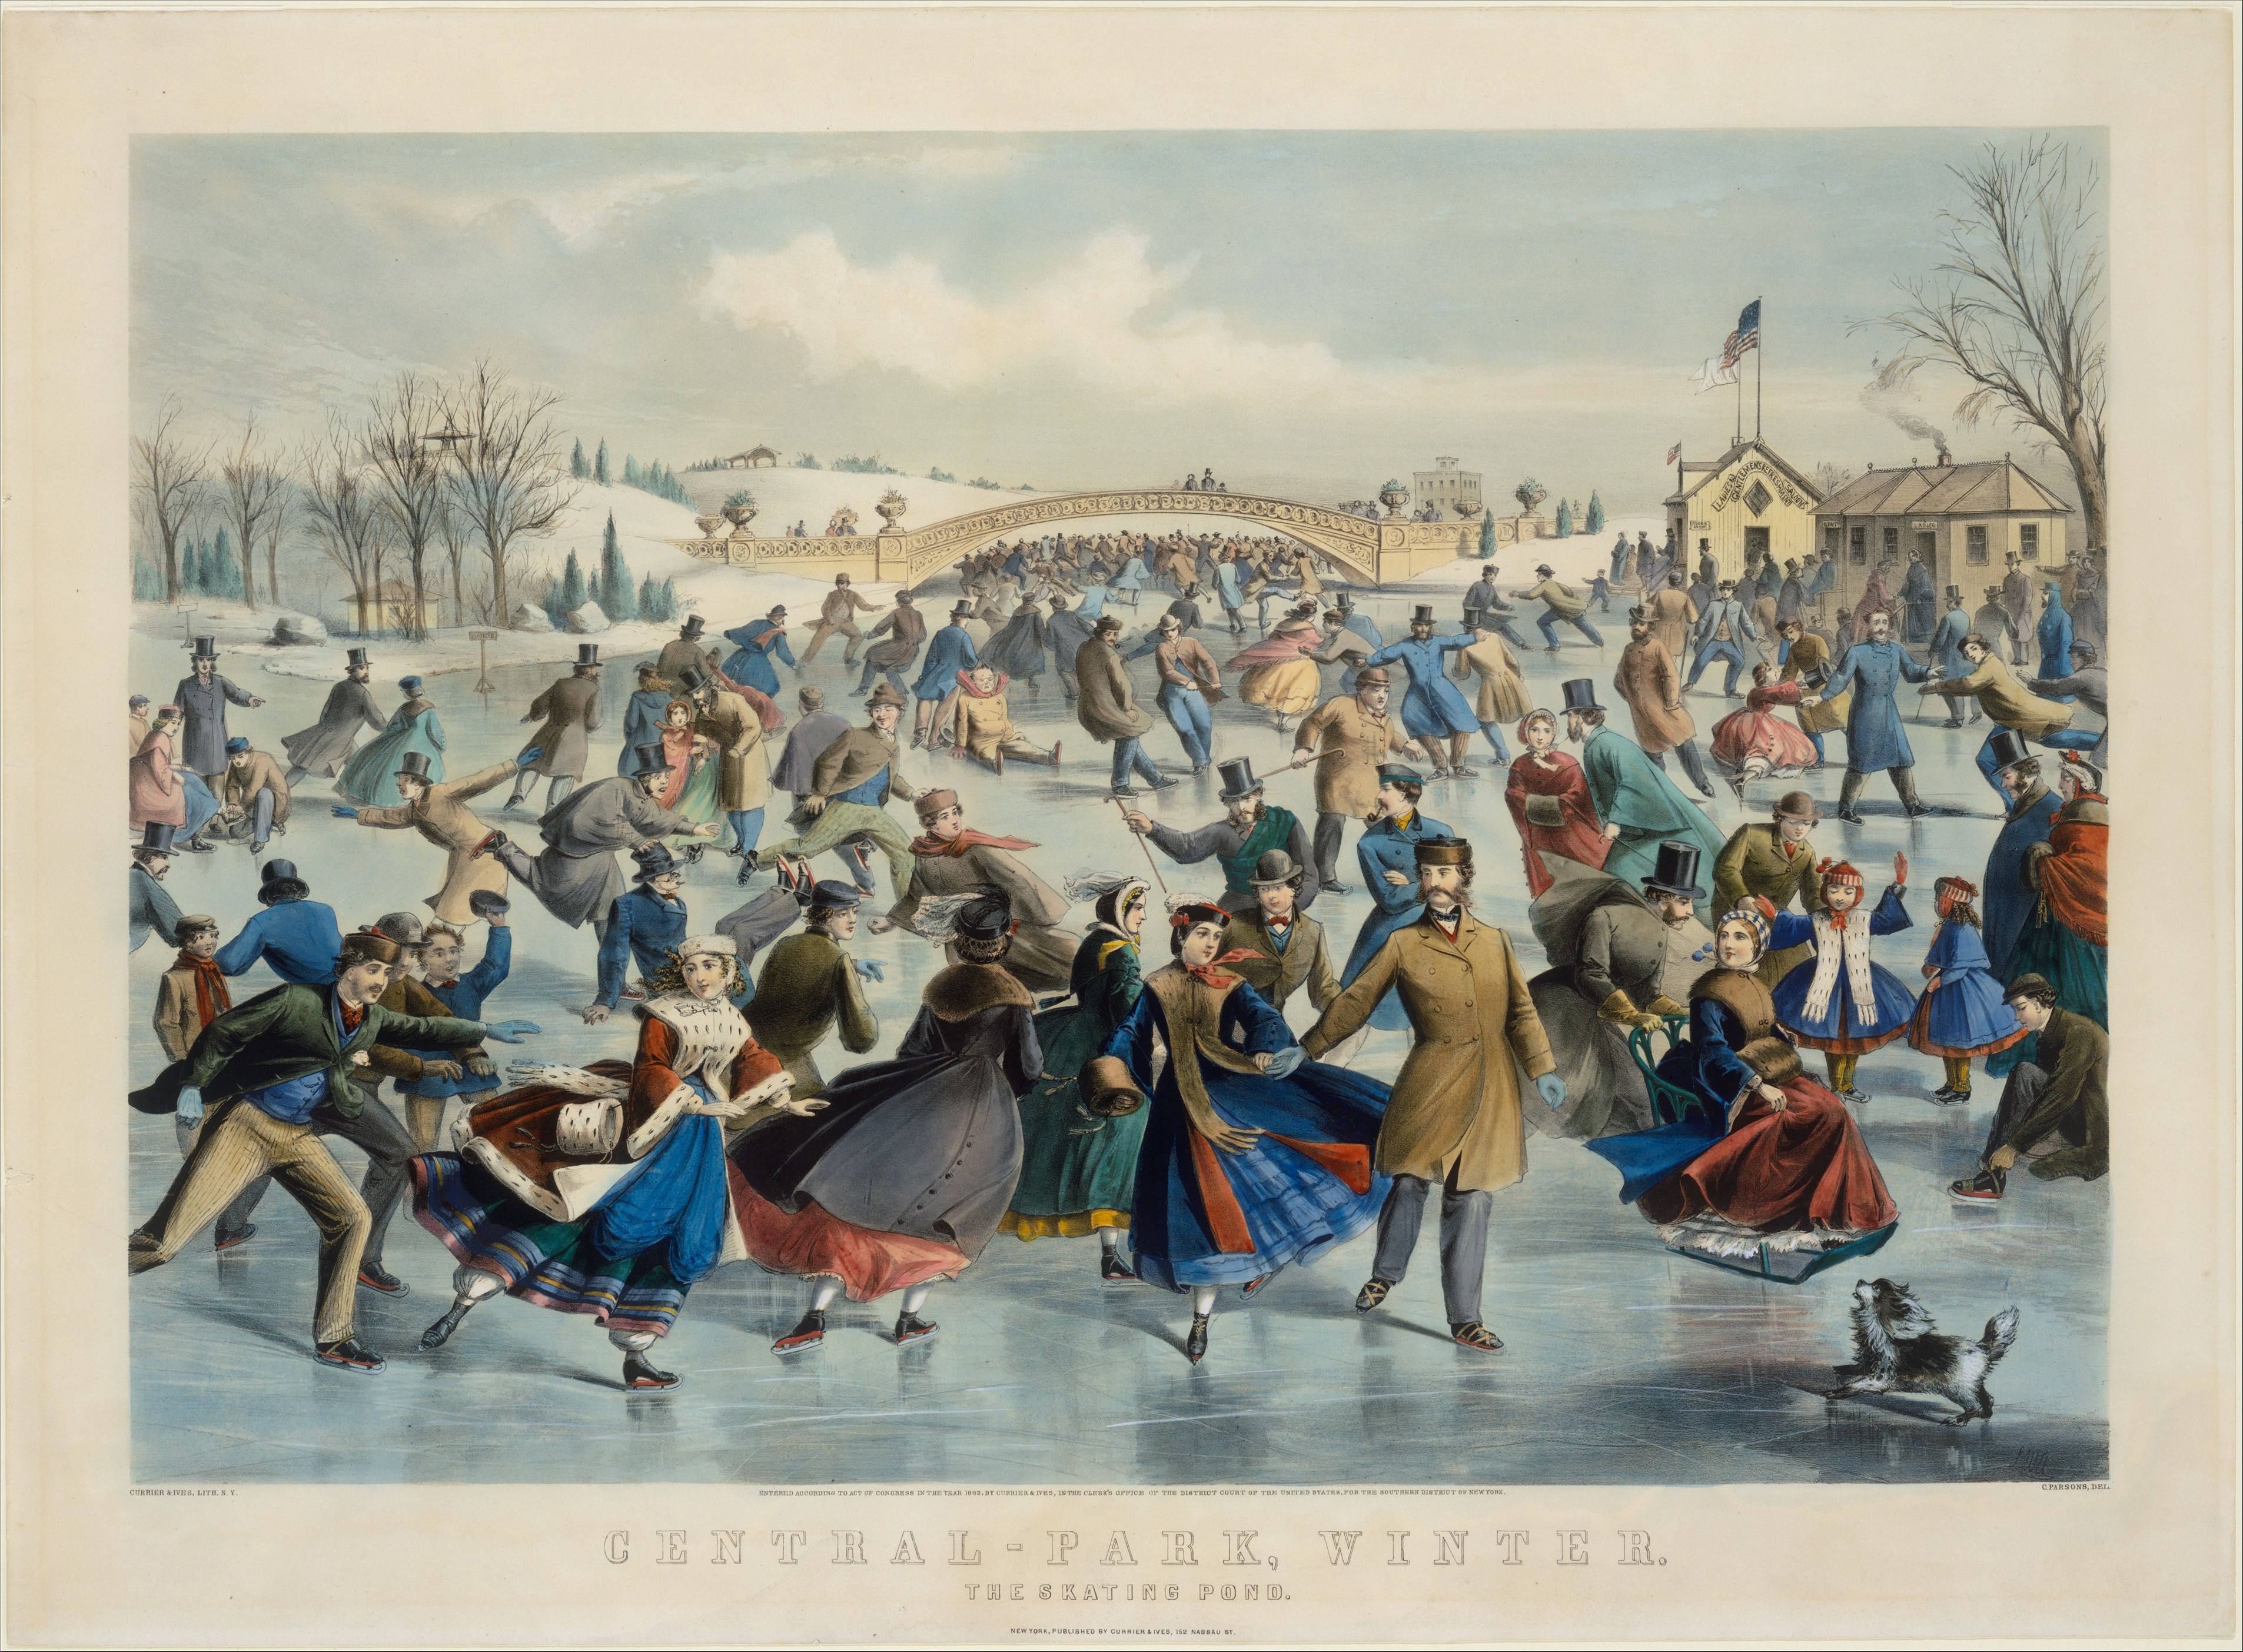 Ice skaters at central park